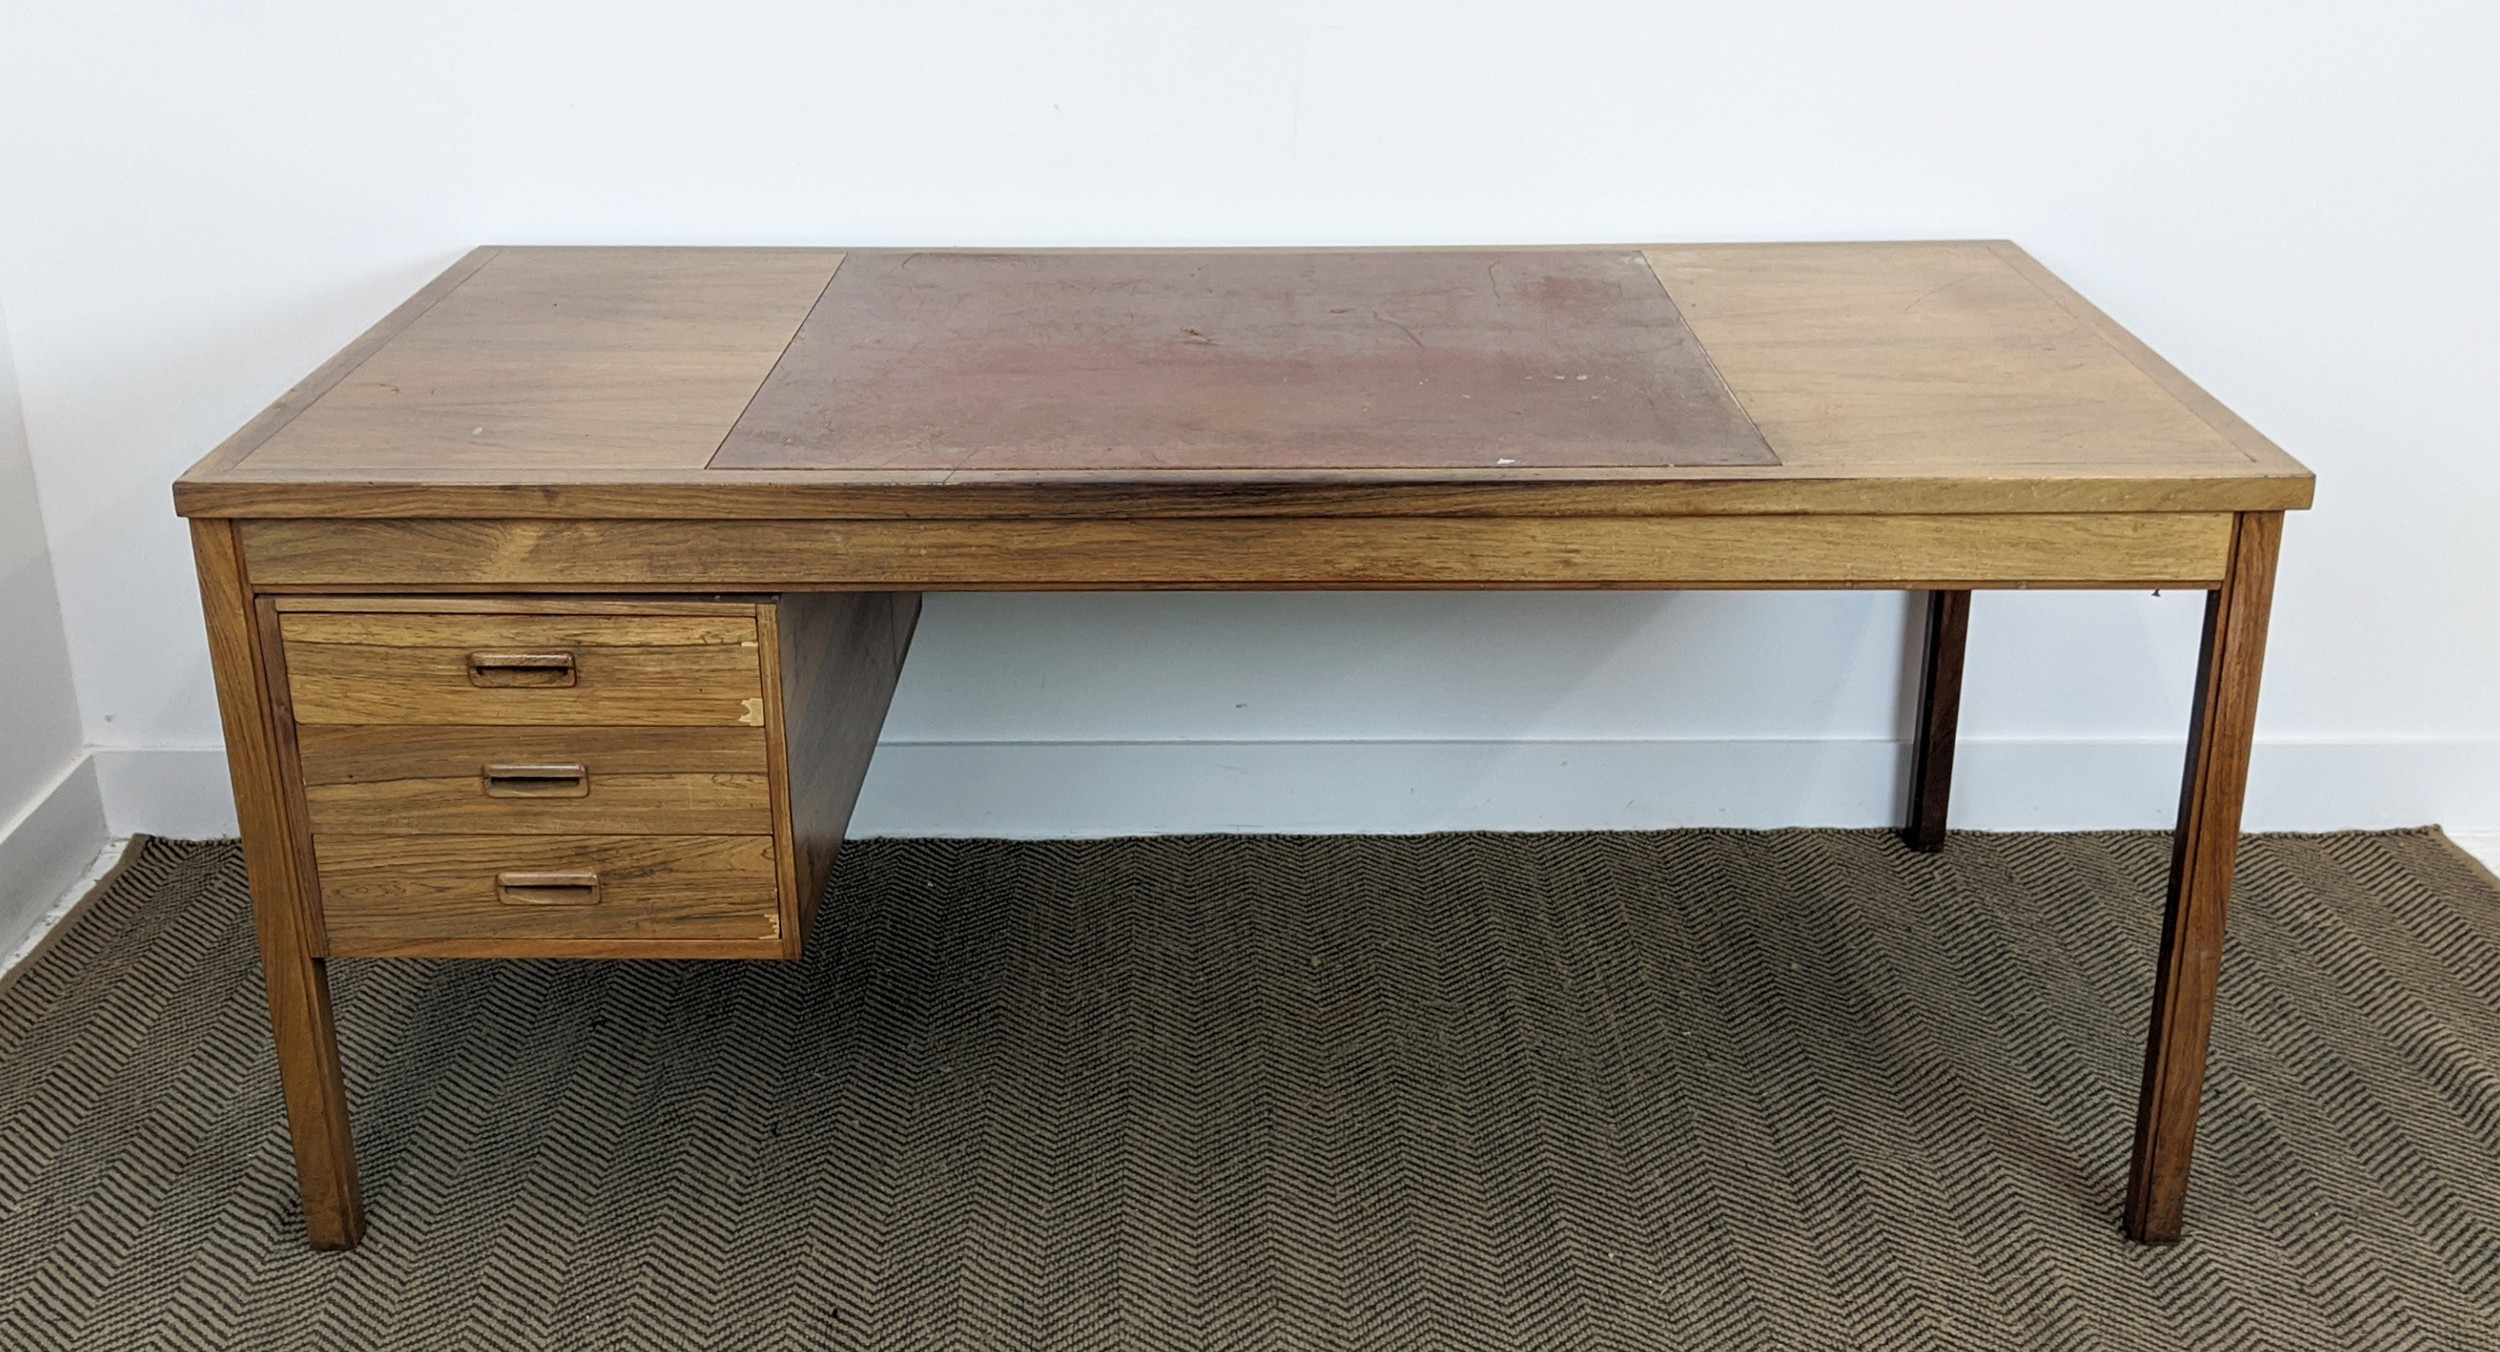 DESK, 171cm x 85.5cm x 73cm approx., with three drawers to one side.